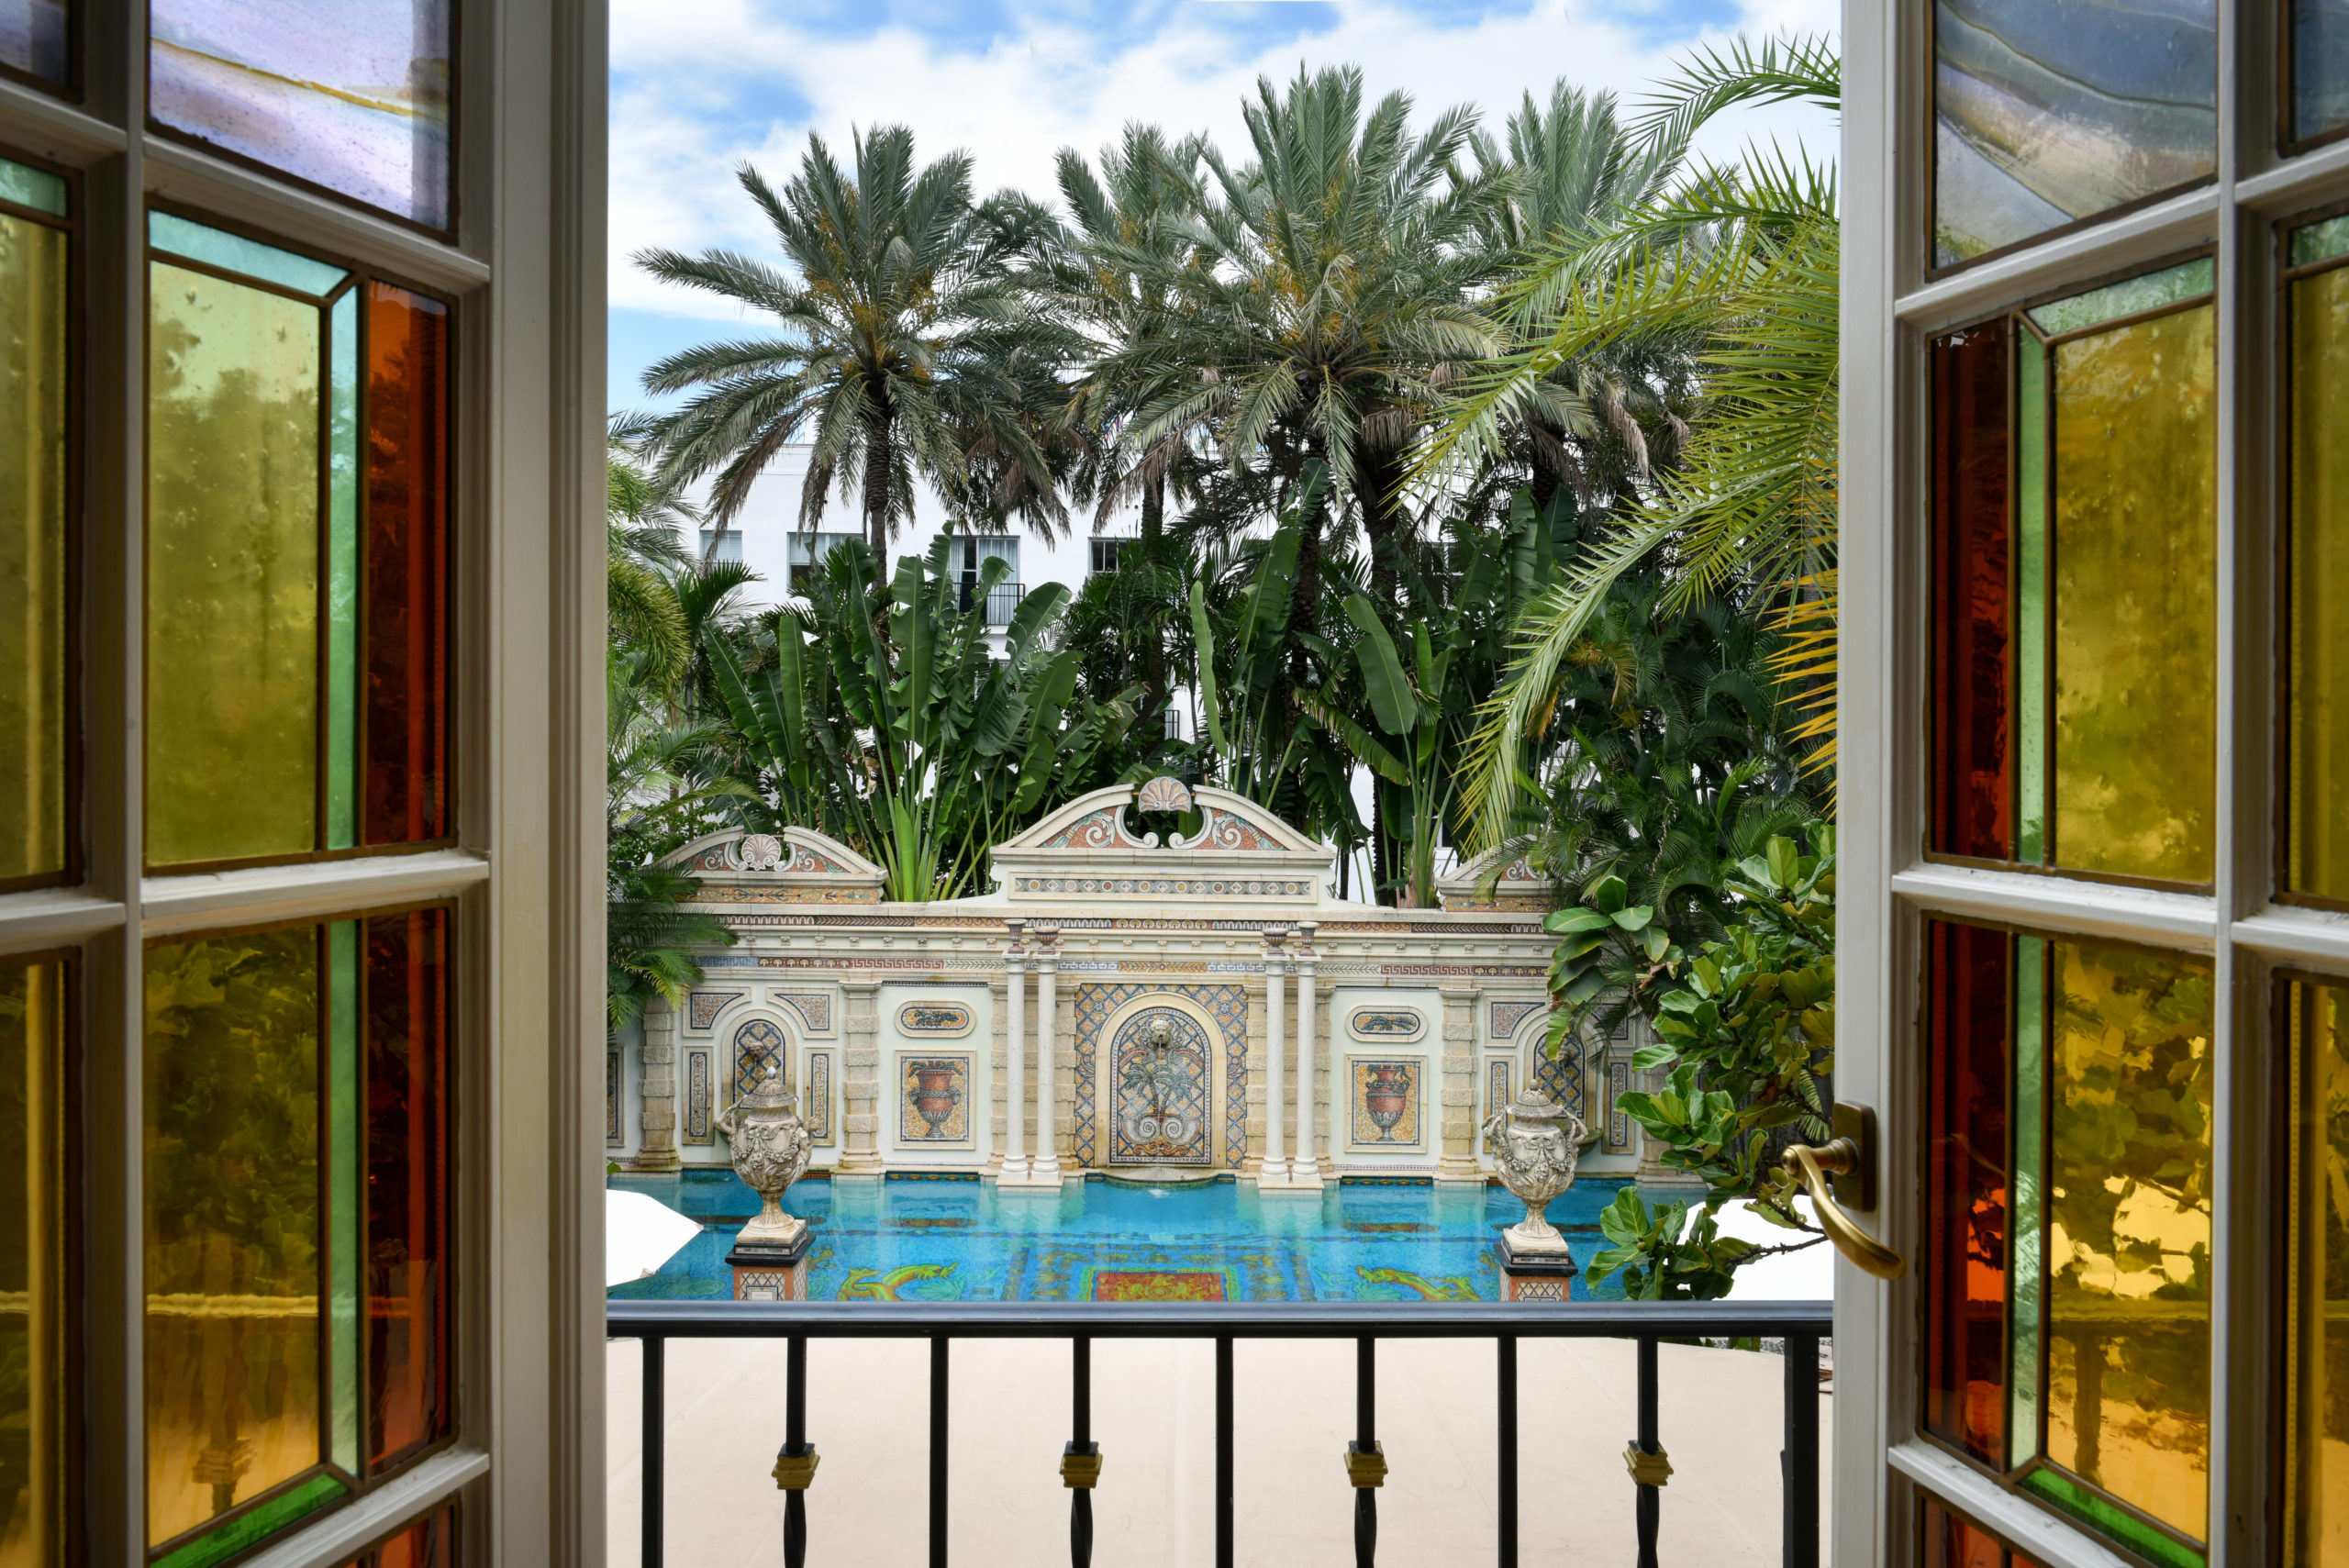 looking out of window with yellow and red stained glass. looking onto a pool with decorative tile work